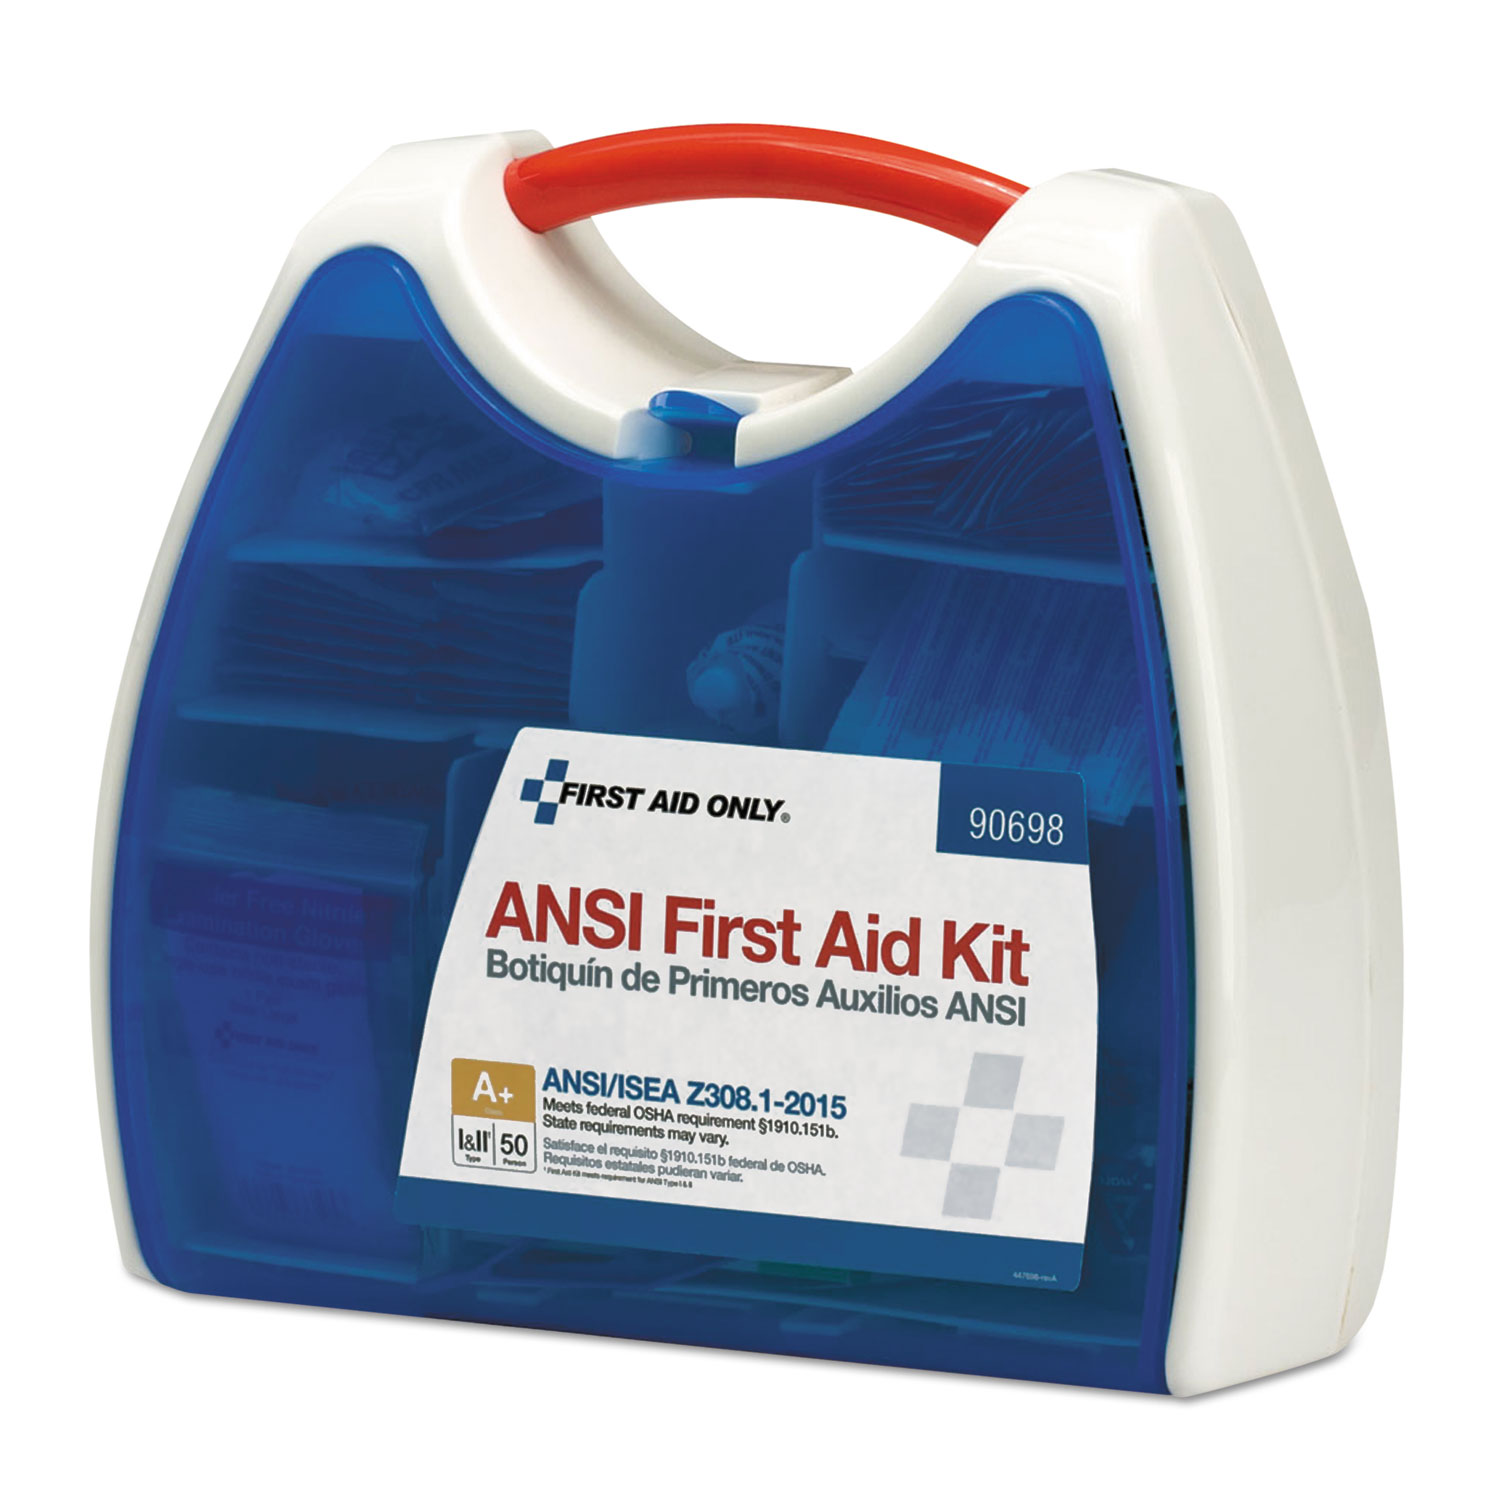 Physicianscare ReadyCare First Aid Kit for up to 50 People 355 Pieces/Kit 90698 - image 2 of 5